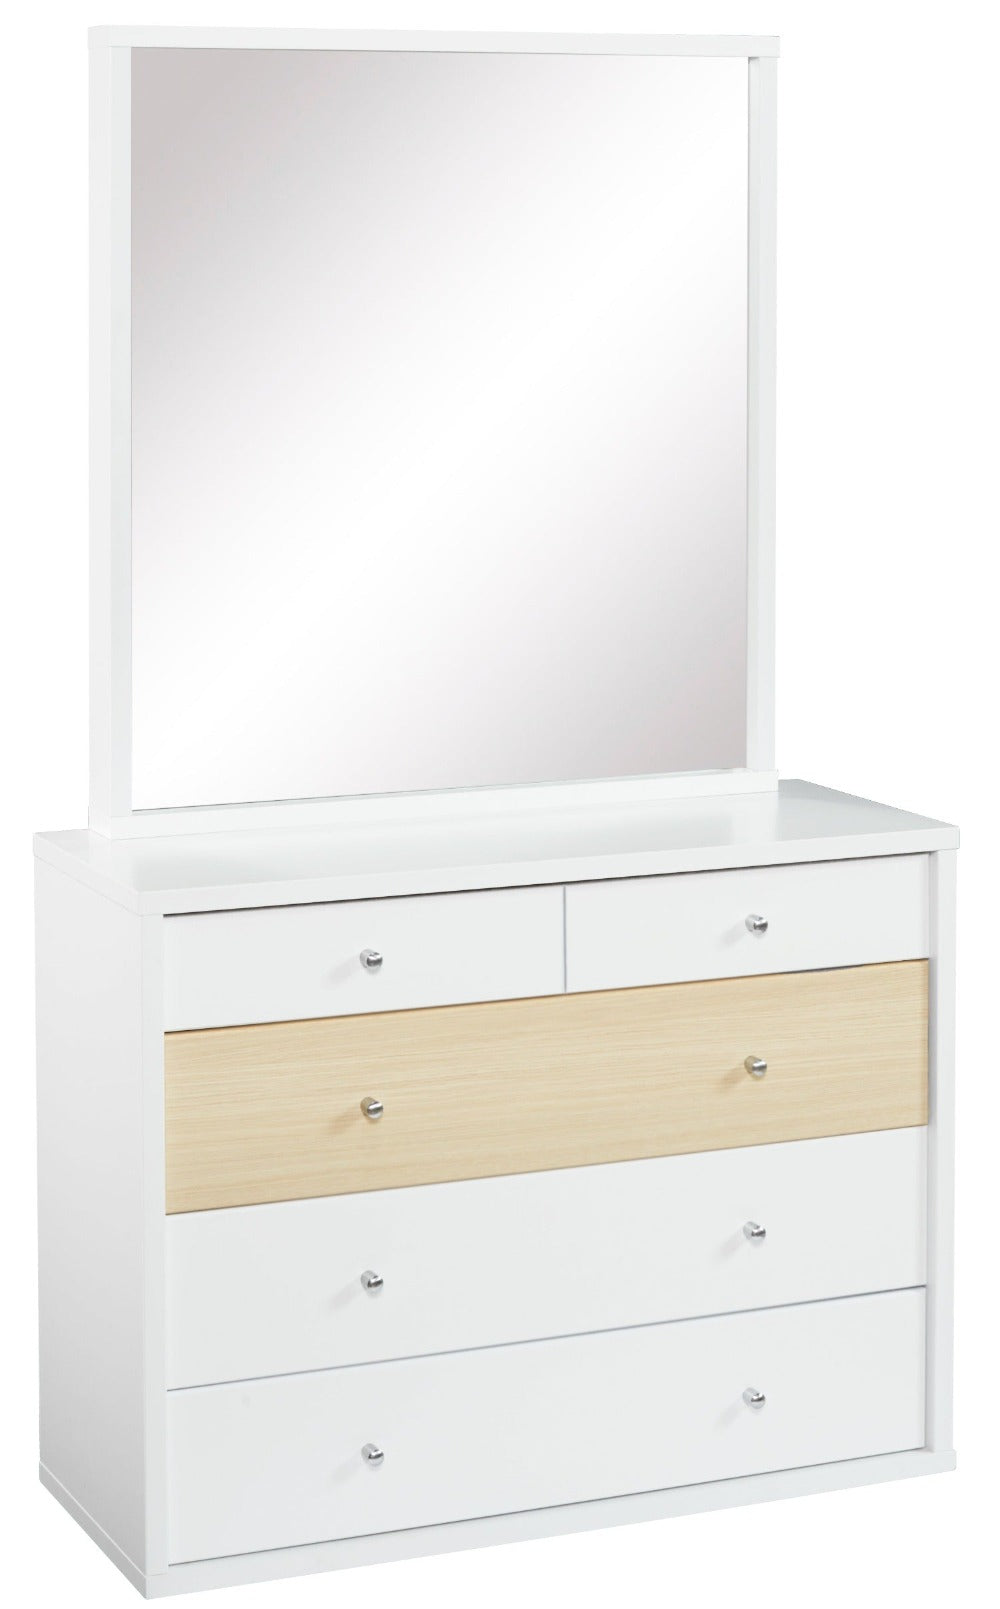 Cosmo 5 Drawer Dresser with Mirror COS-D105